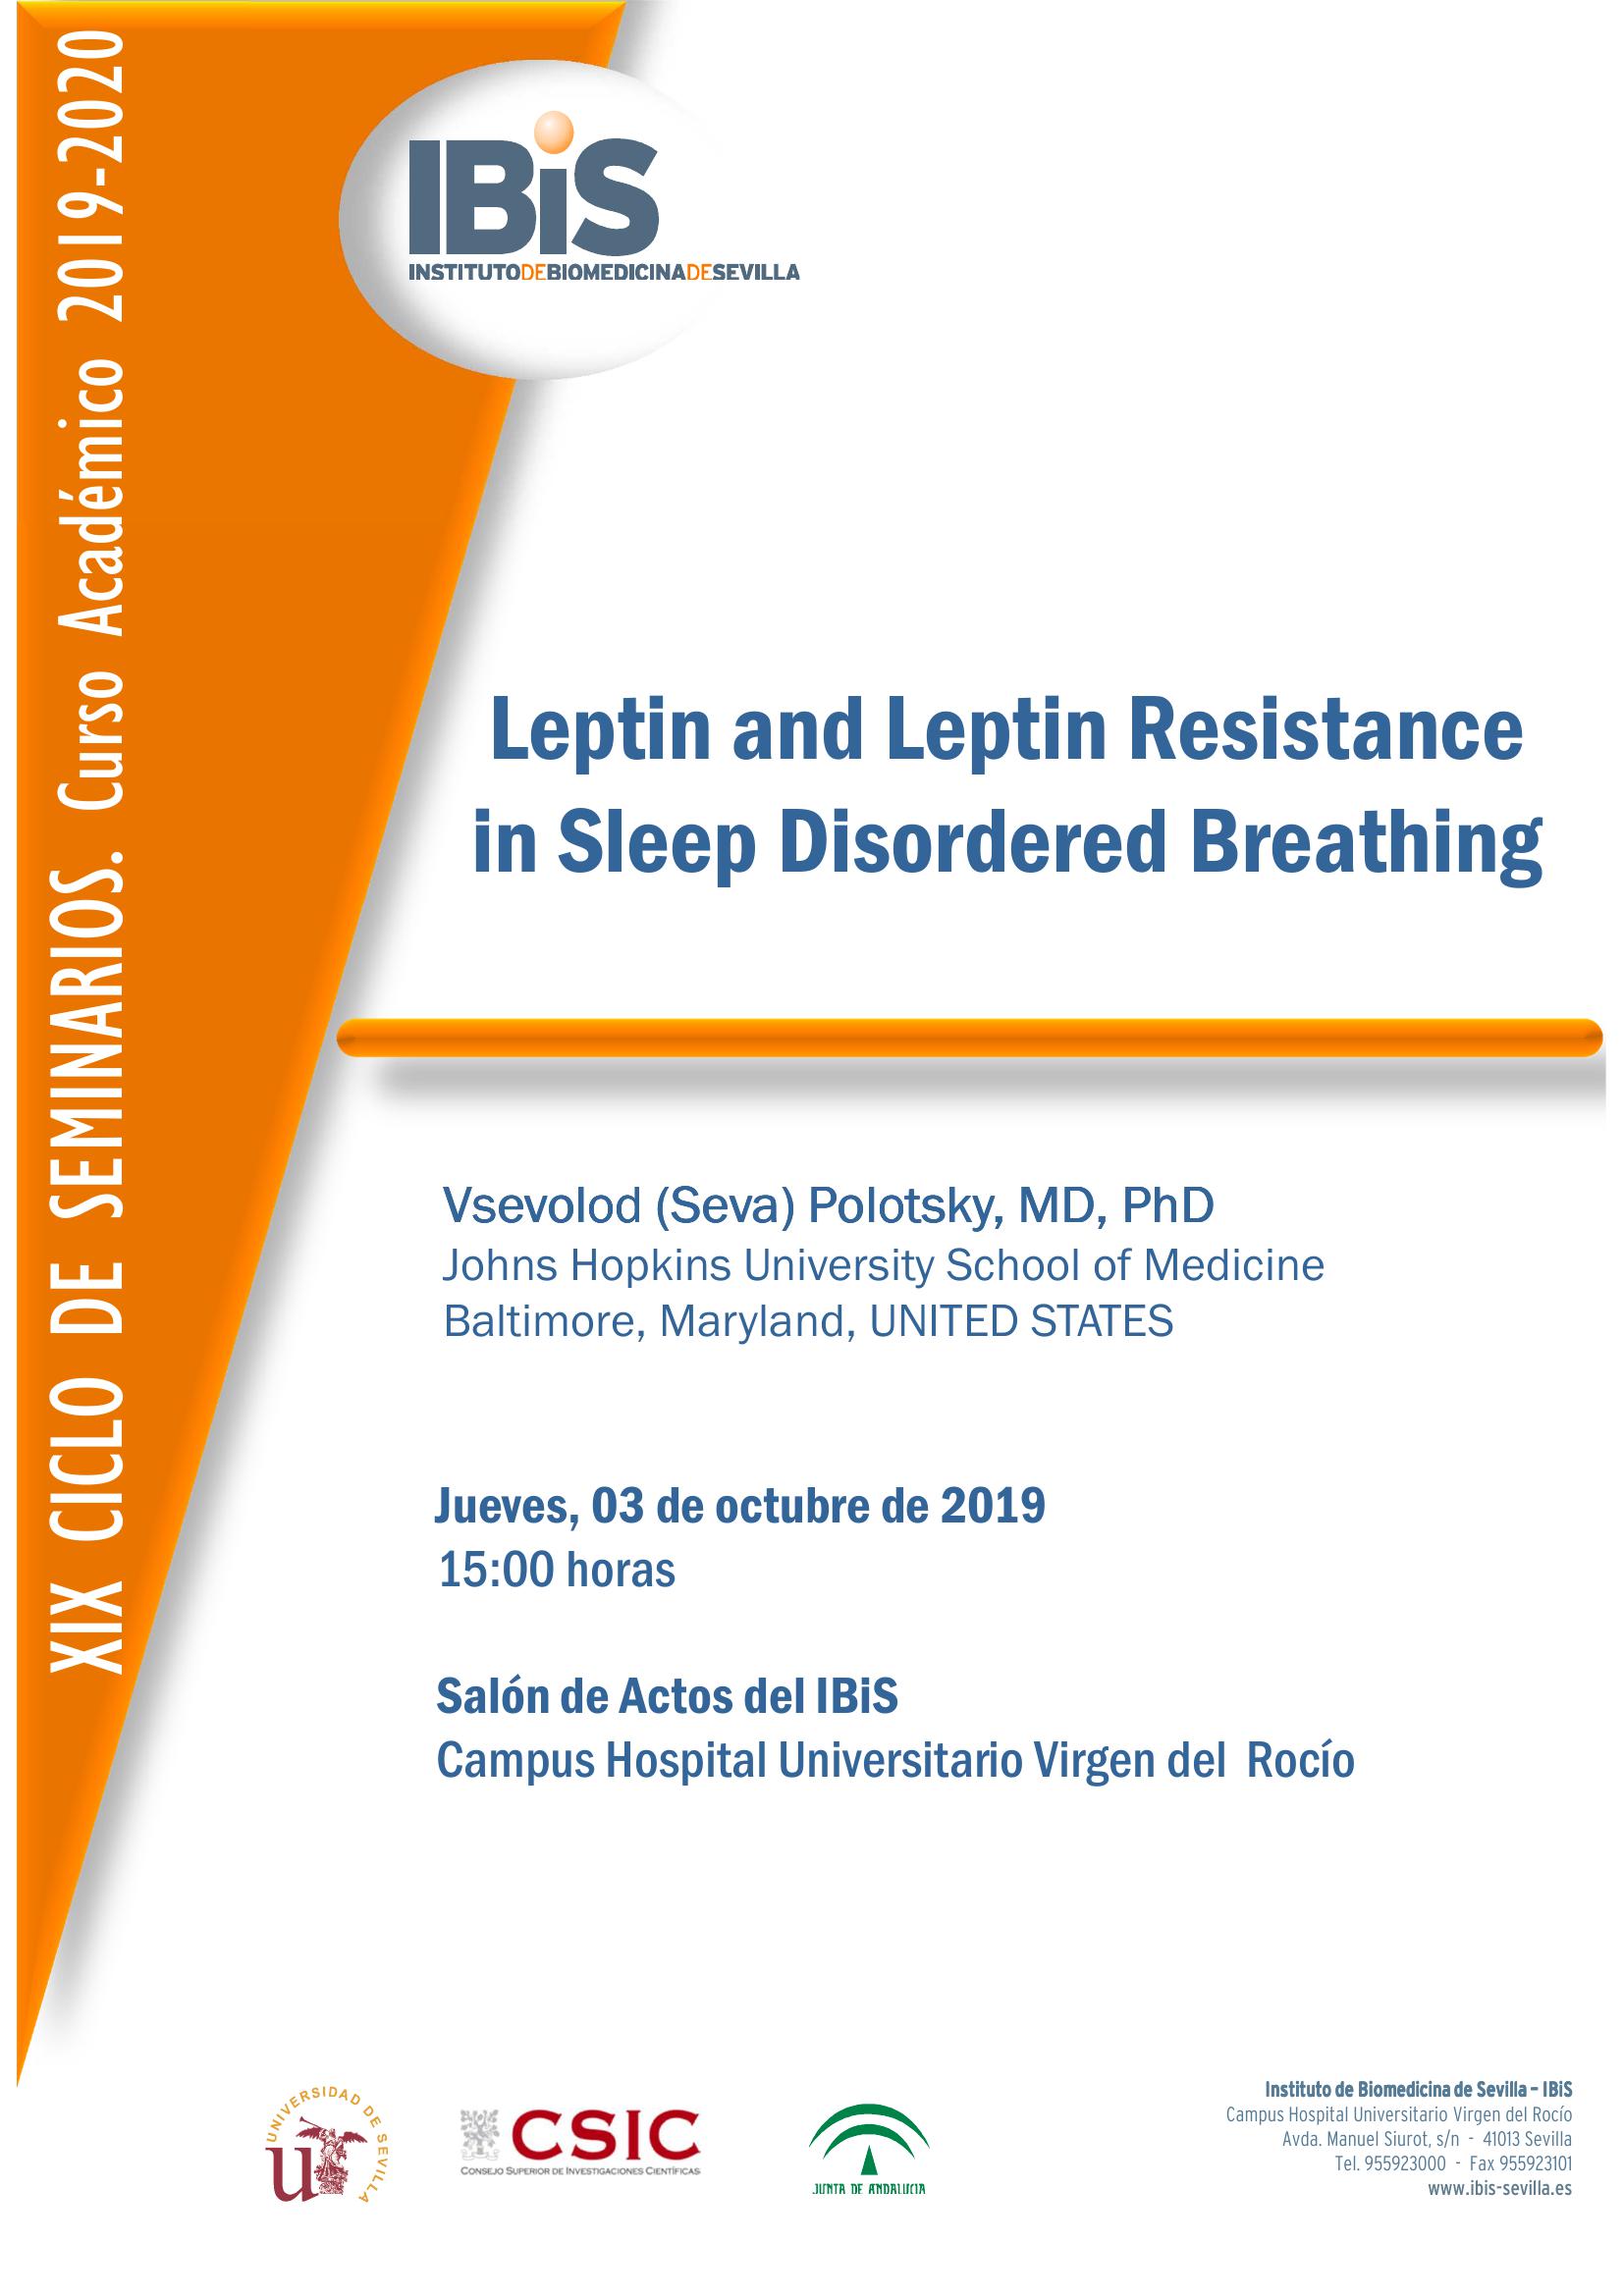 Poster: Leptin and Leptin Resistance in Sleep Disordered Breathing